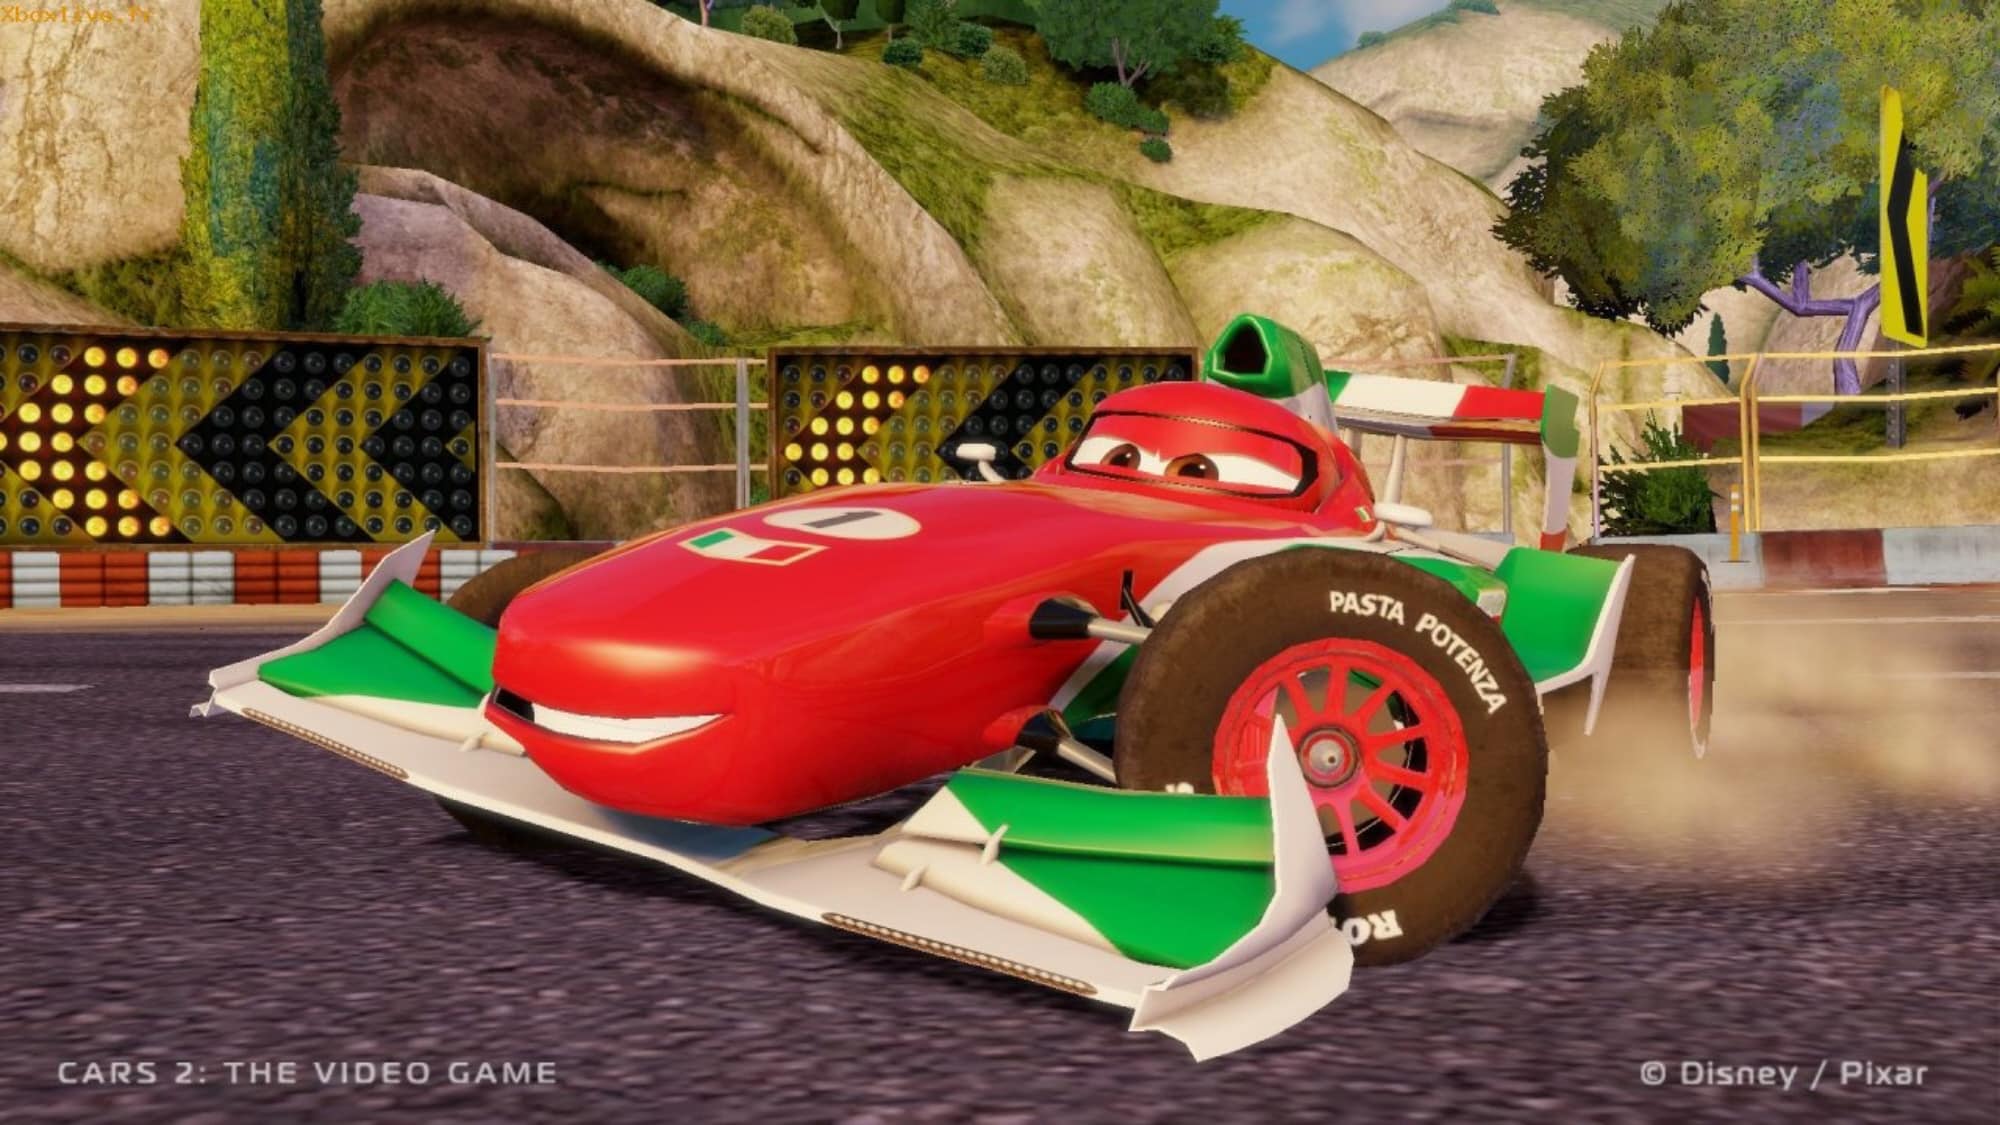 cars 2 video game making interface more complicated